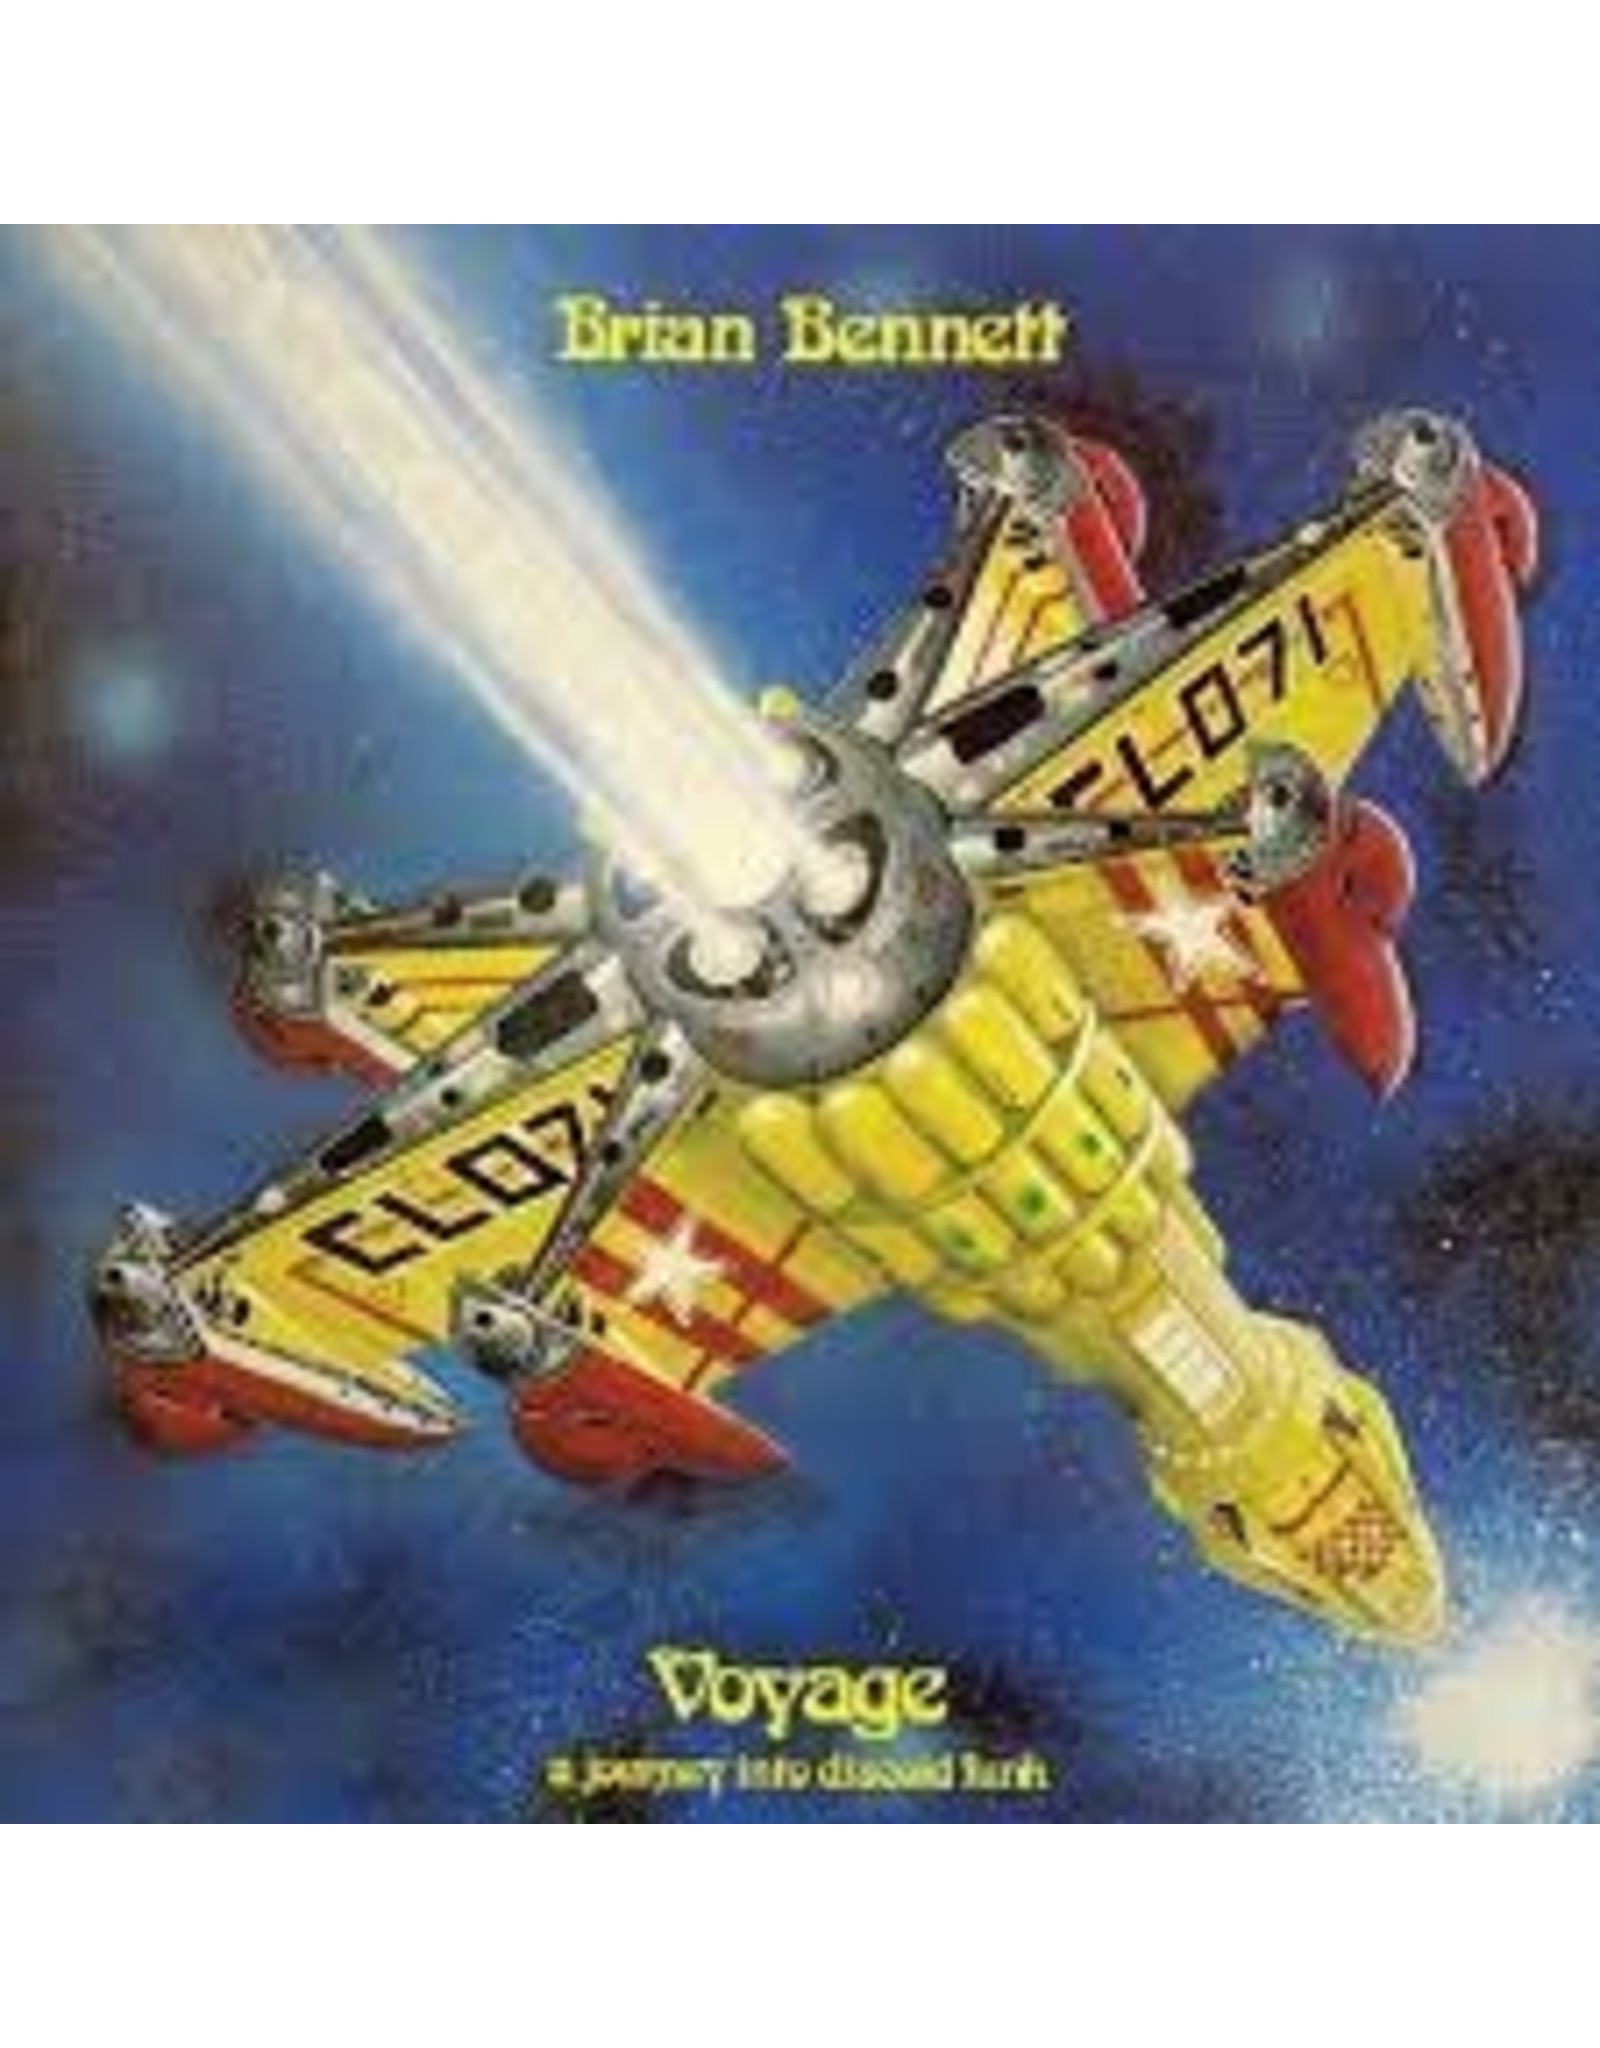 Bennett, Brian - Voyage: A Journey Into Discoid Funk LP (Record Store Day Pressing on Blue With Black Swirl Vinyl)